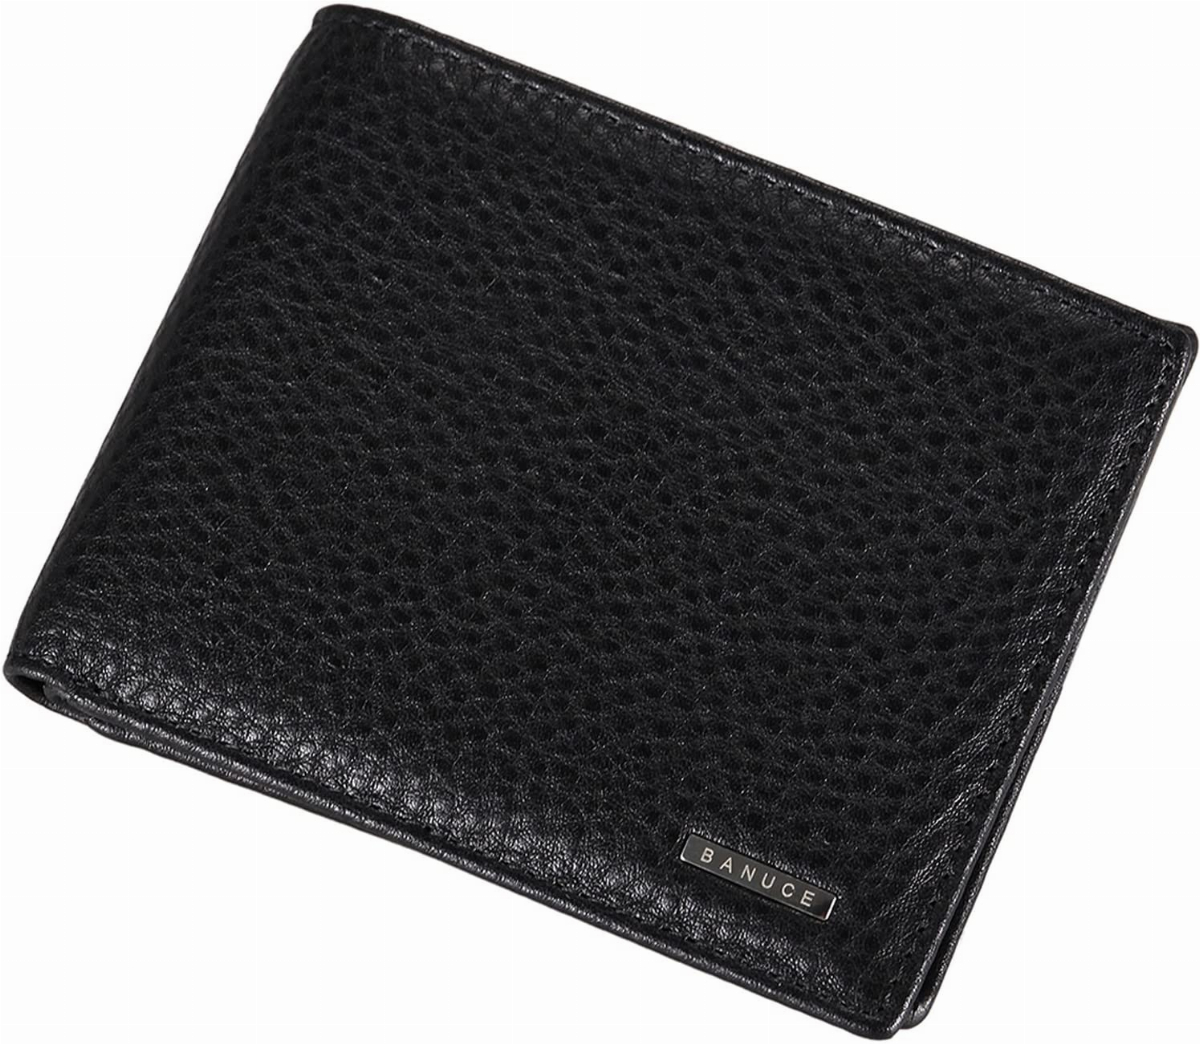 Kalmar RFID Travel Wallet RFID Blocking Slim Bifold Genuine Leather Minimalist Front Pocket Wallets for Men with Money Clip Extra Capacity Travel Wallet Color : Black, Size : 3.74.7 inches 